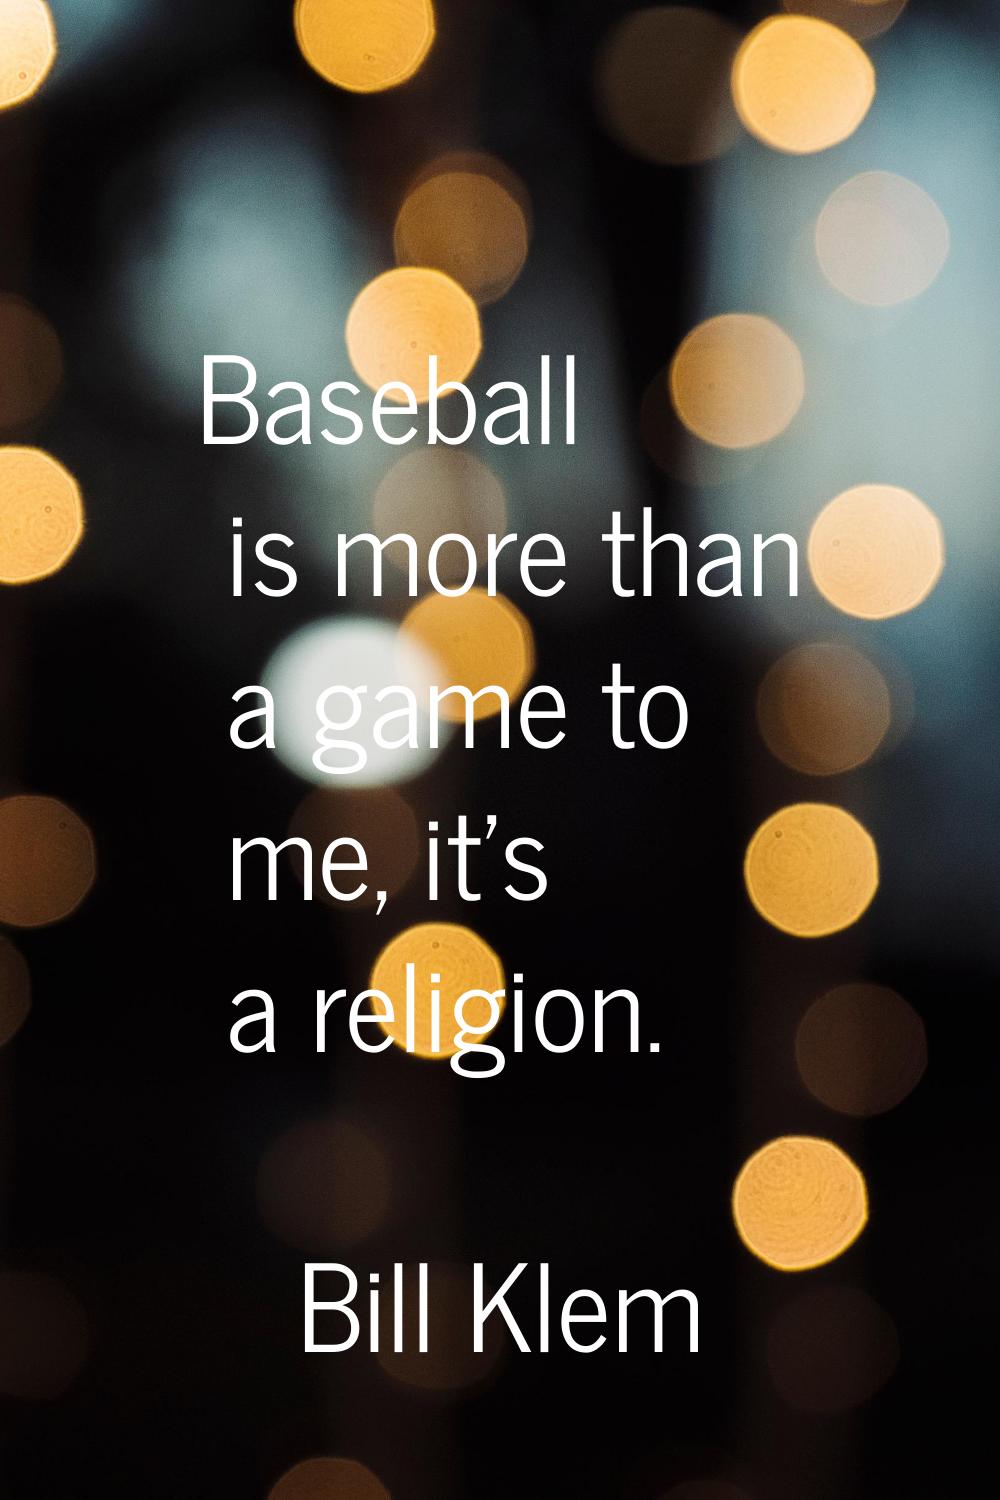 Baseball is more than a game to me, it's a religion.